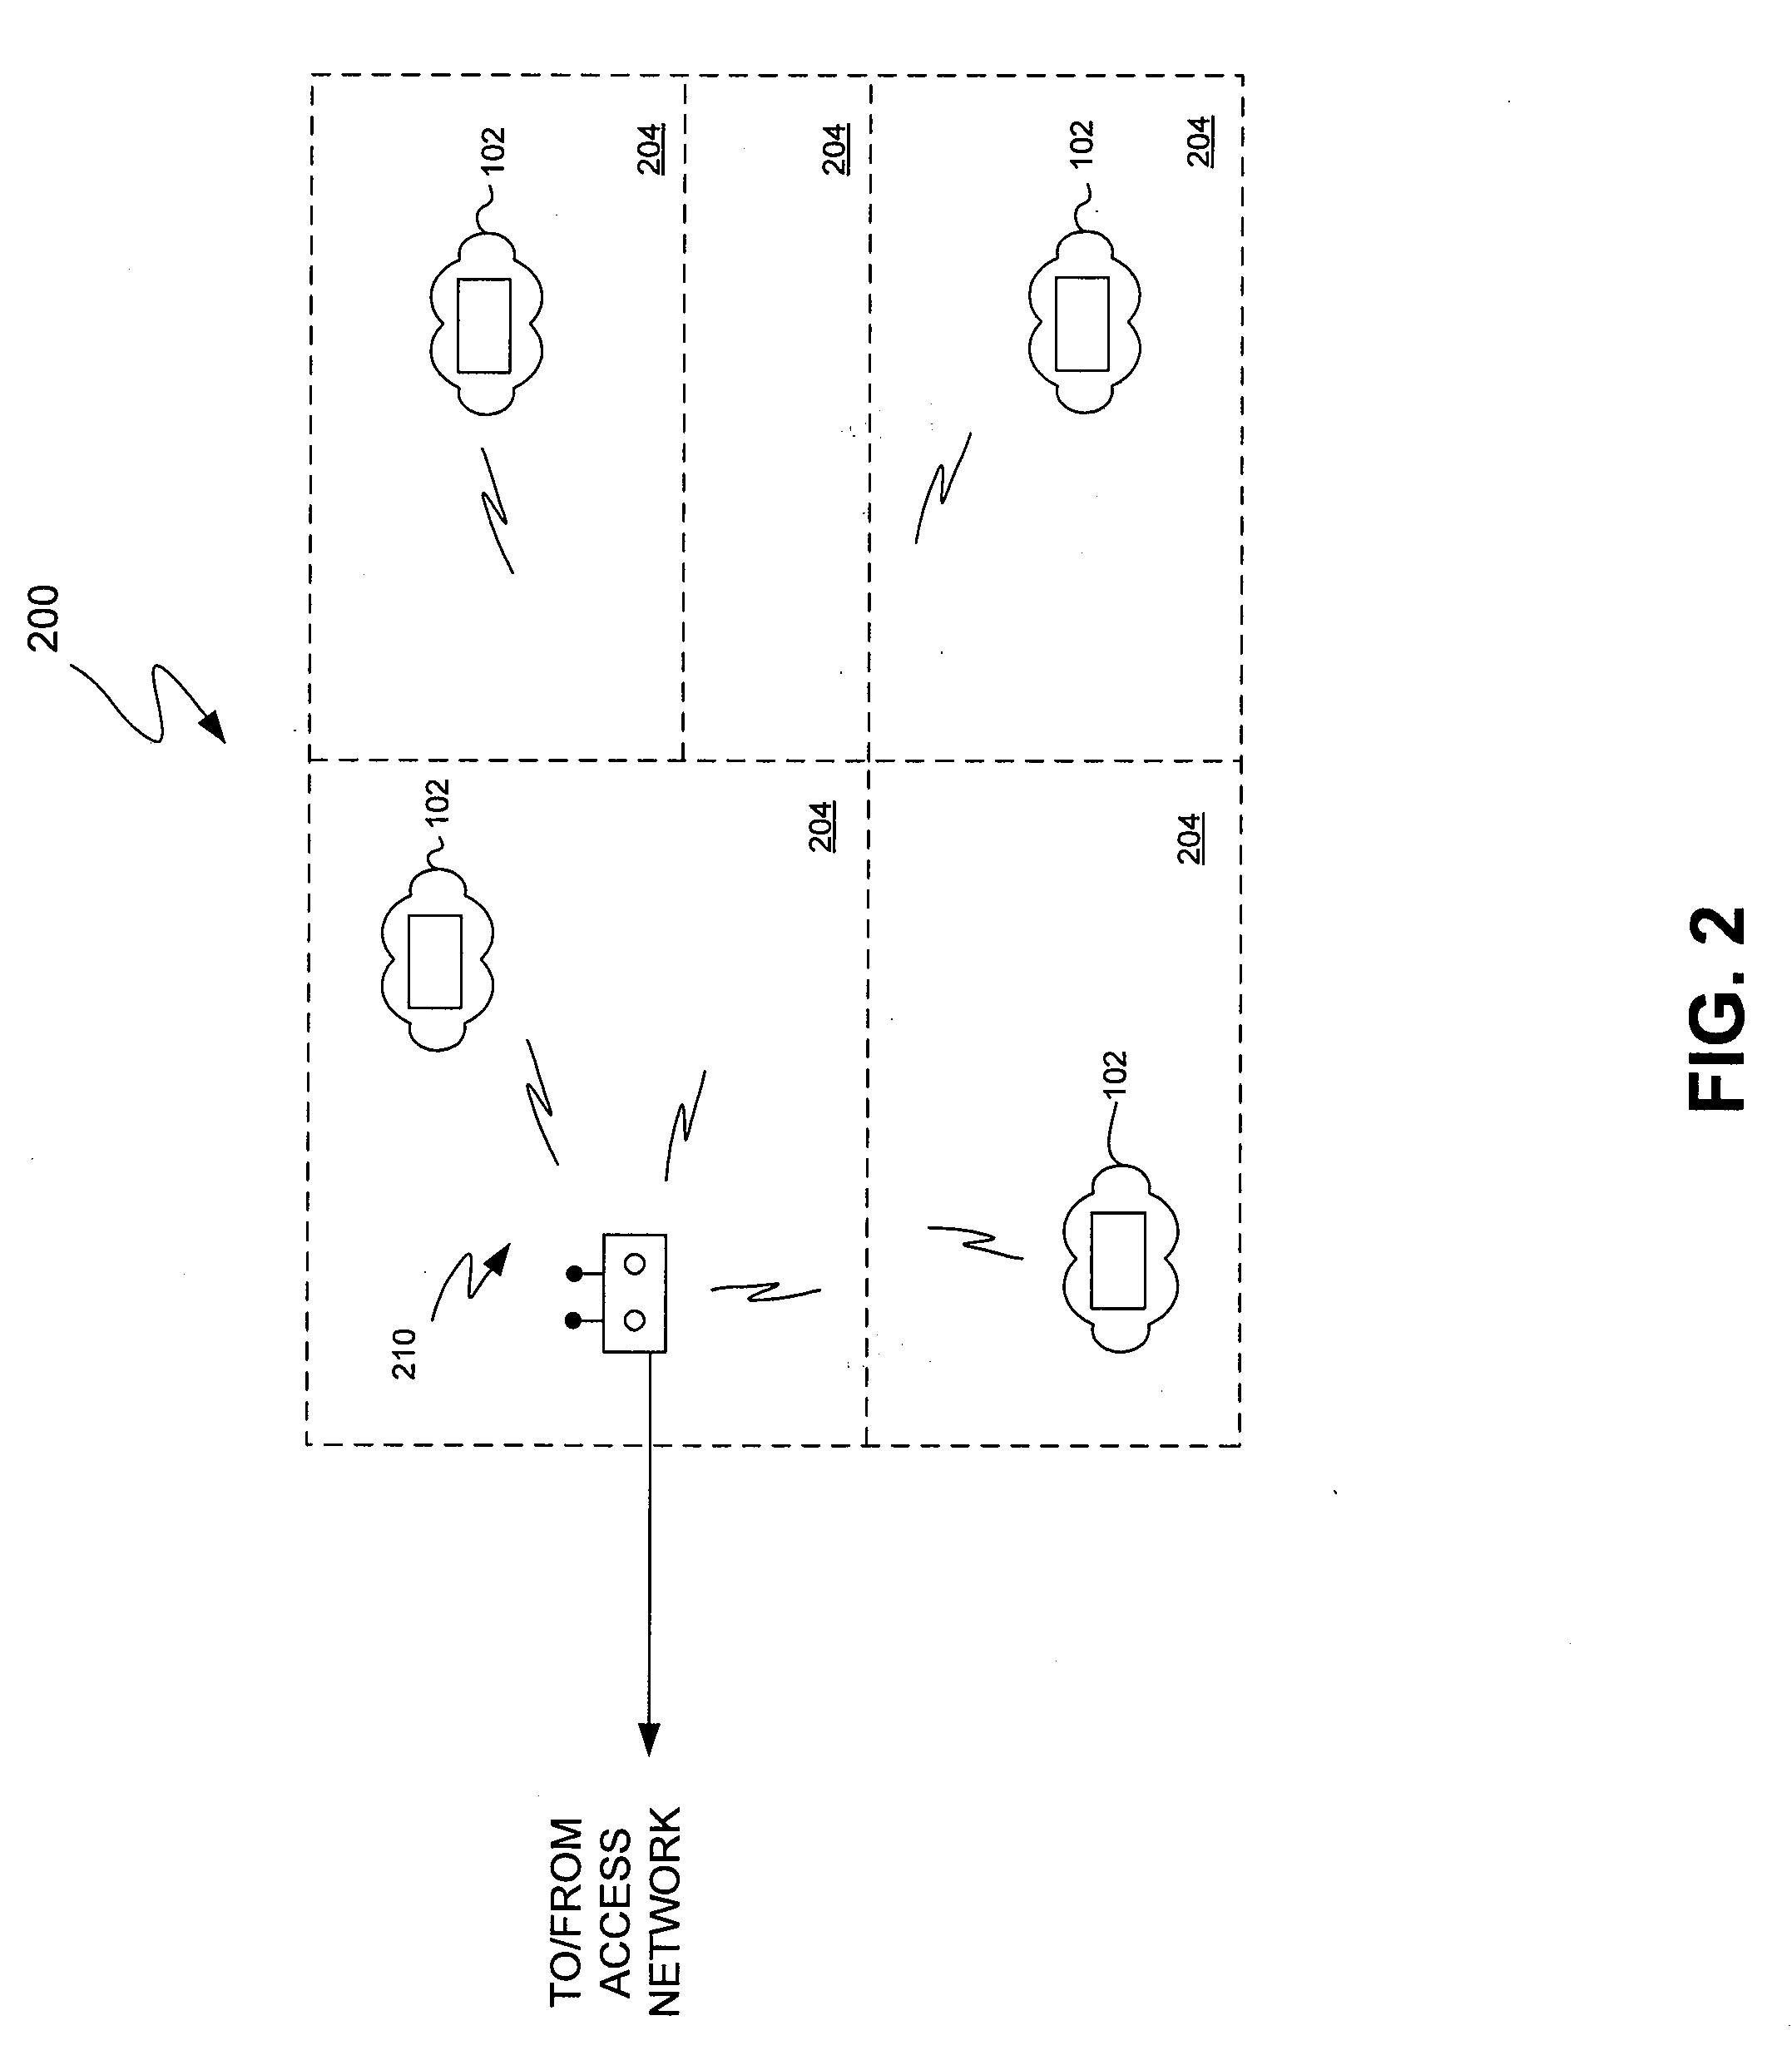 Systems and methods for alarm tone selection, distribution, and playback in a networked audiovisual device